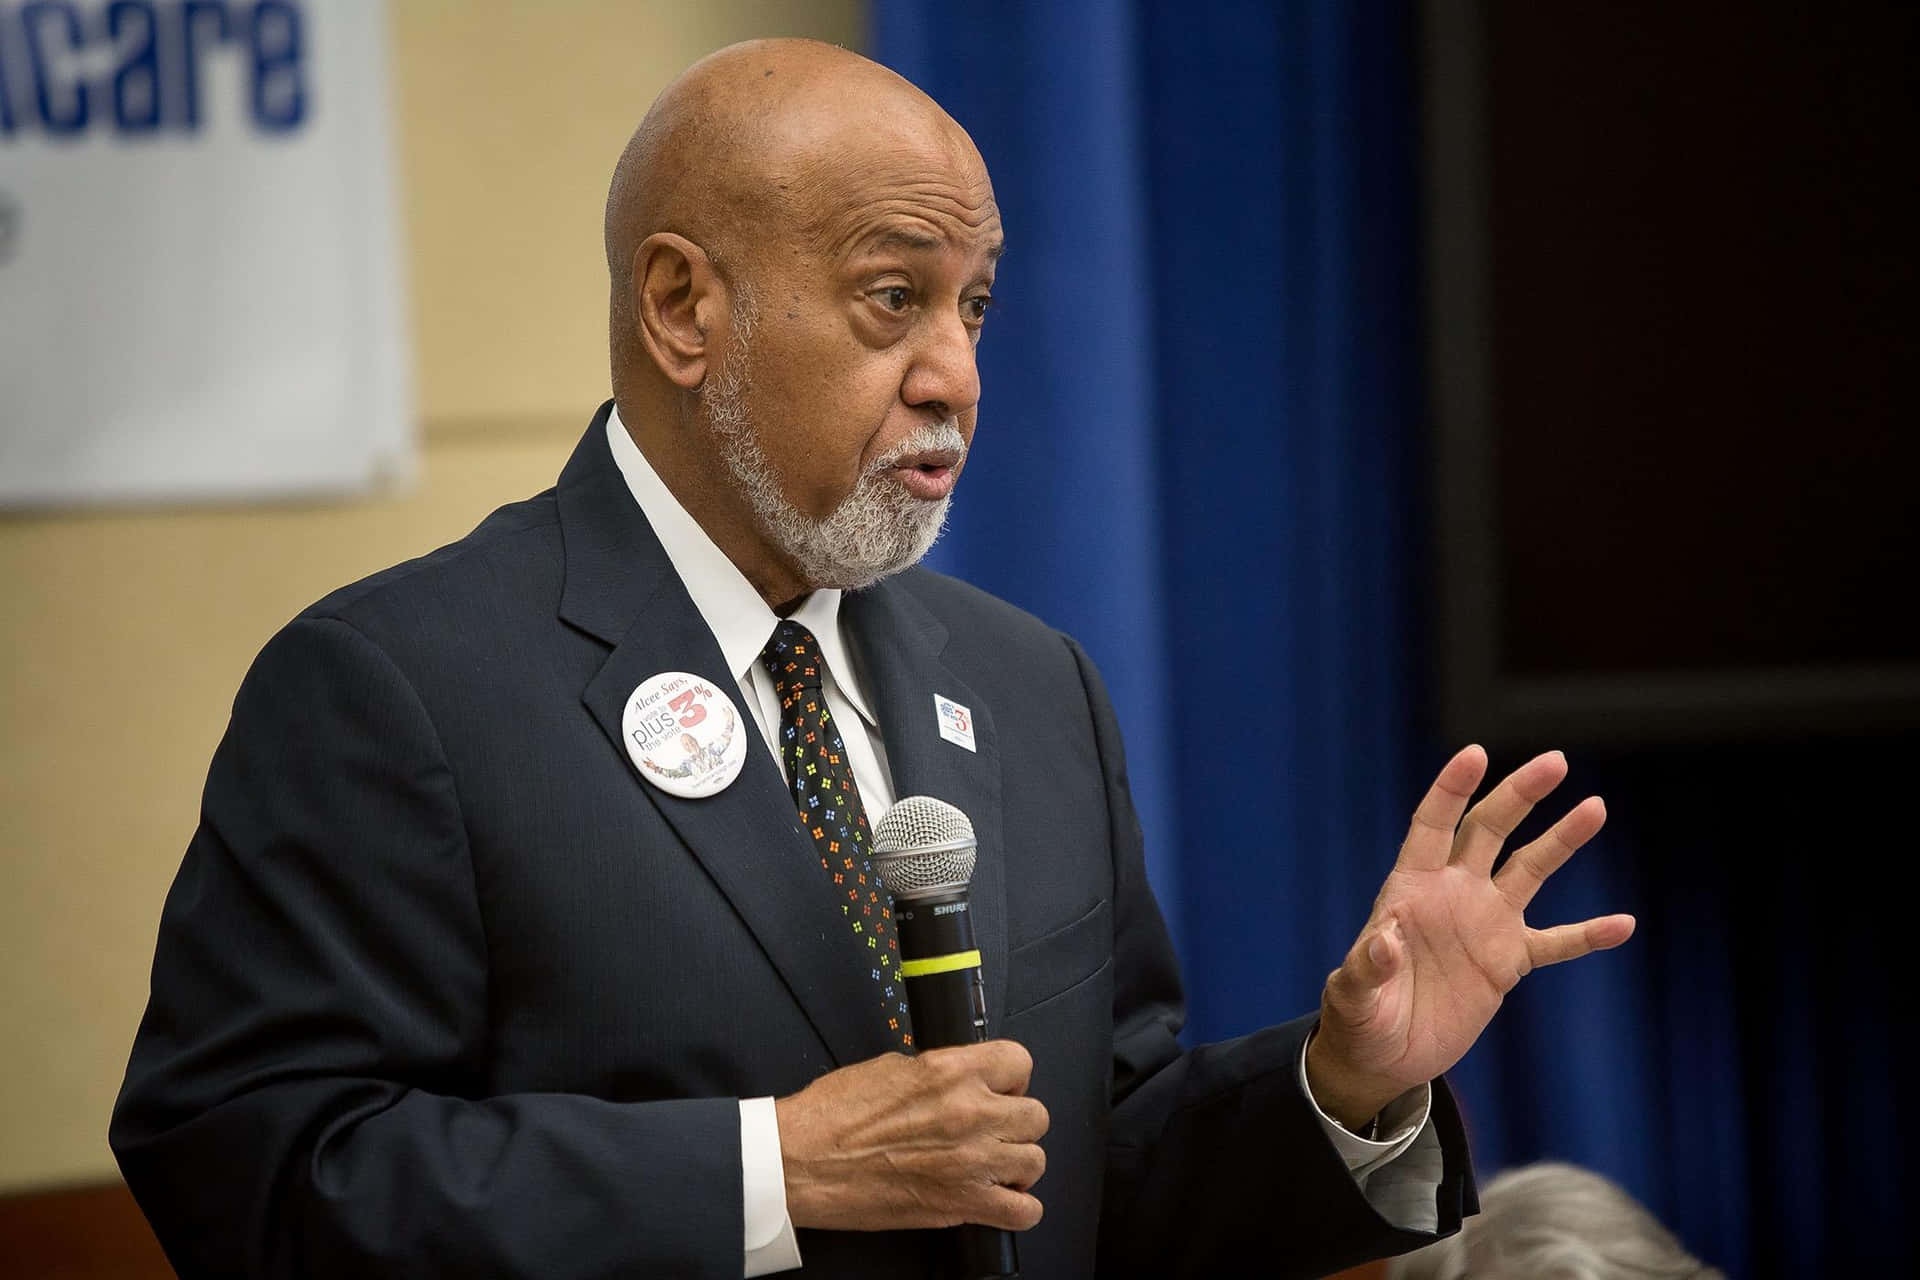 Alcee Hastings passionately delivering a speech to an engaged audience. Wallpaper